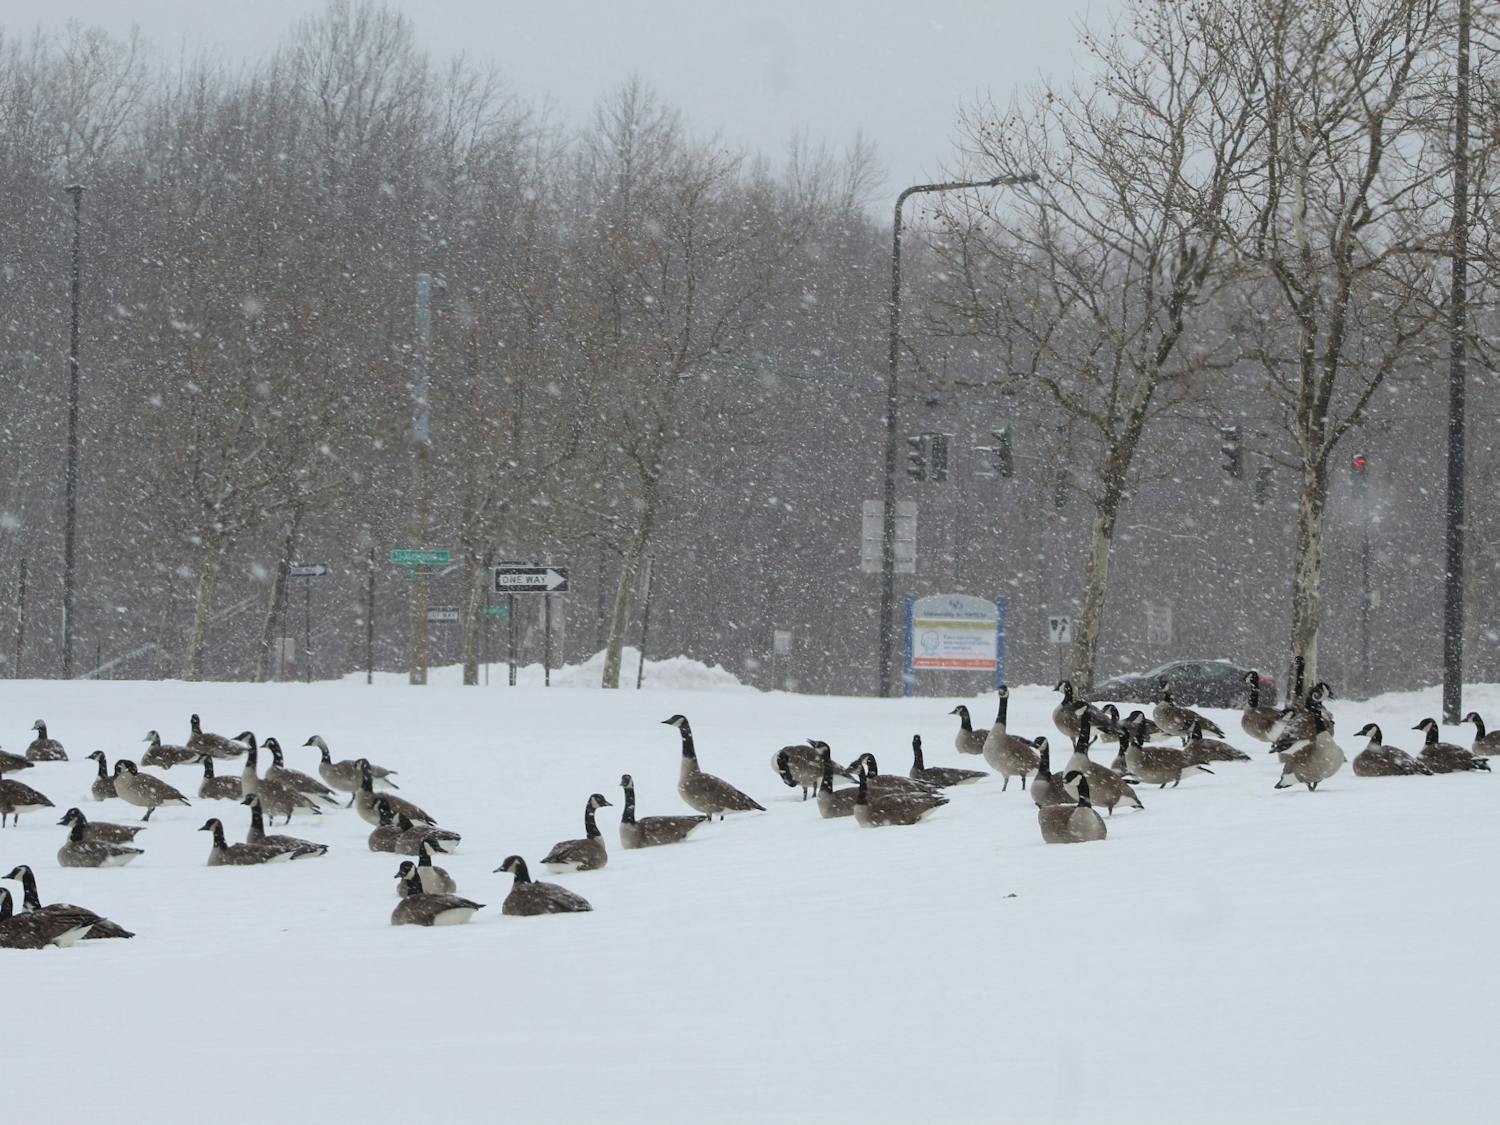 Geese waddle through the Buffalo snow in February.
